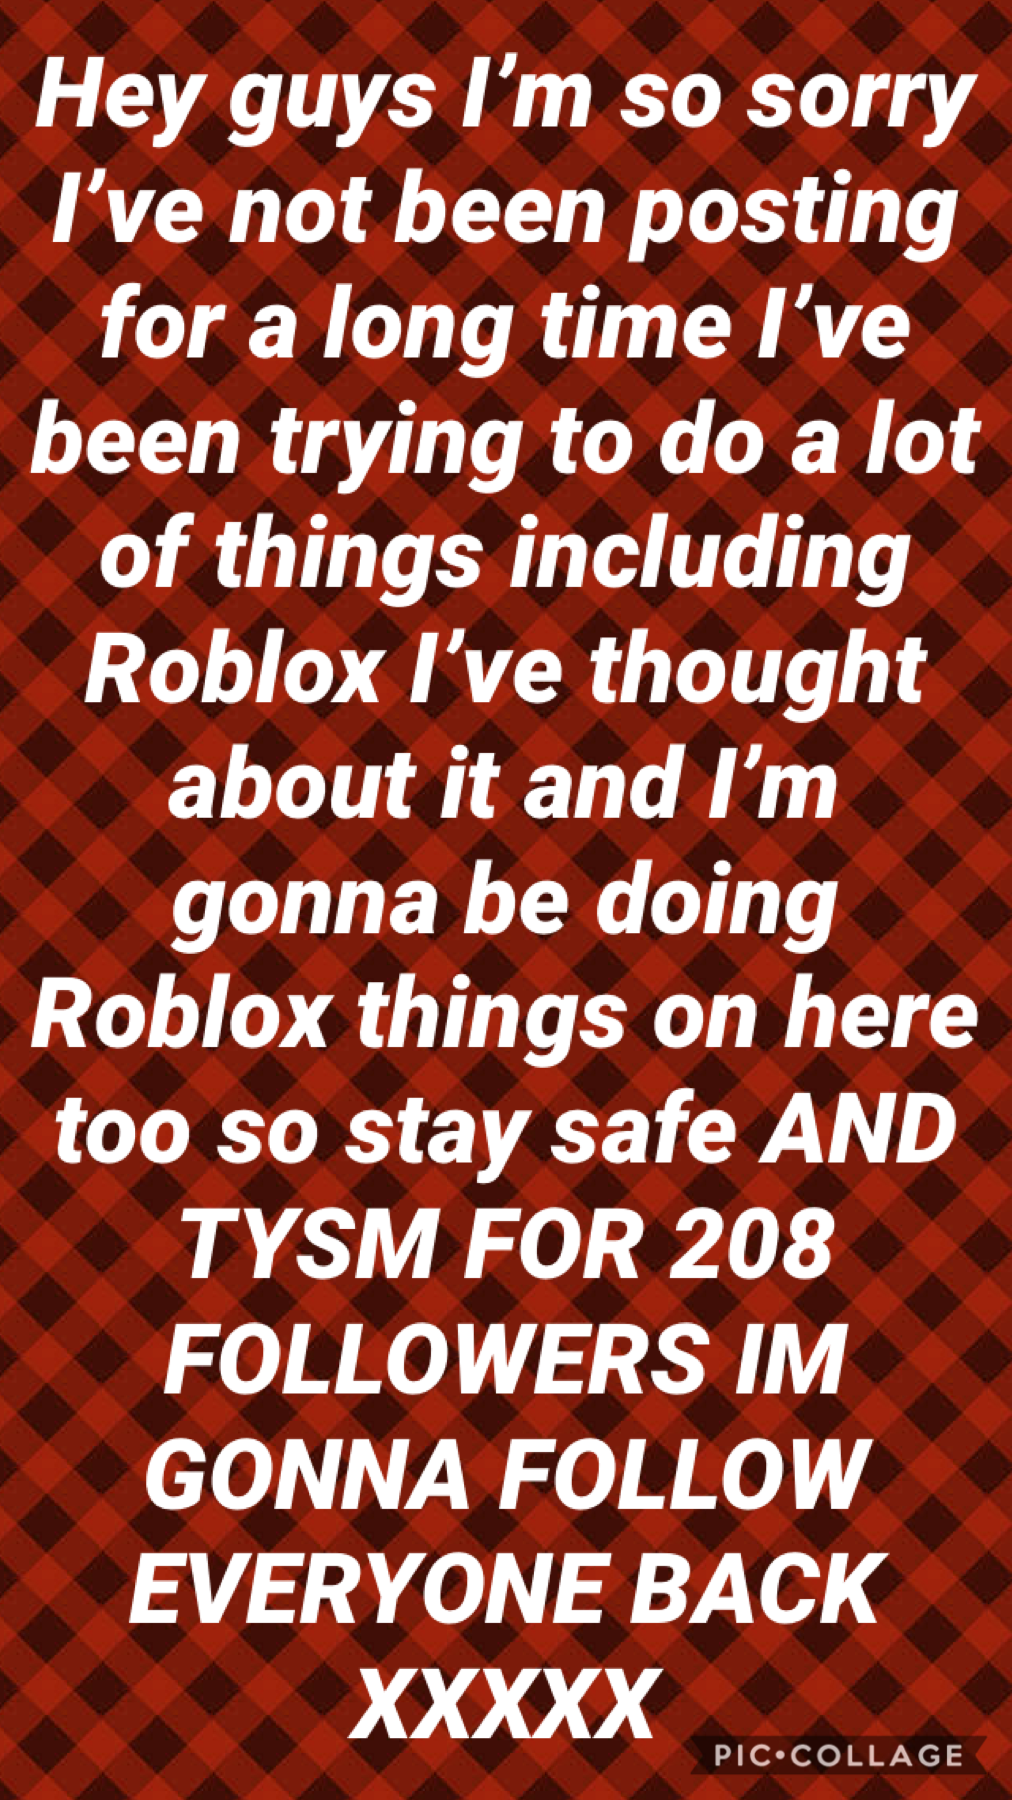 Hey guys sos I’ve been inactive again I’m gonna be on here more often and I’m gonna be doing #roblox on here too! Xxx stay safe and tysm for 208 followers I’m following everyone back!